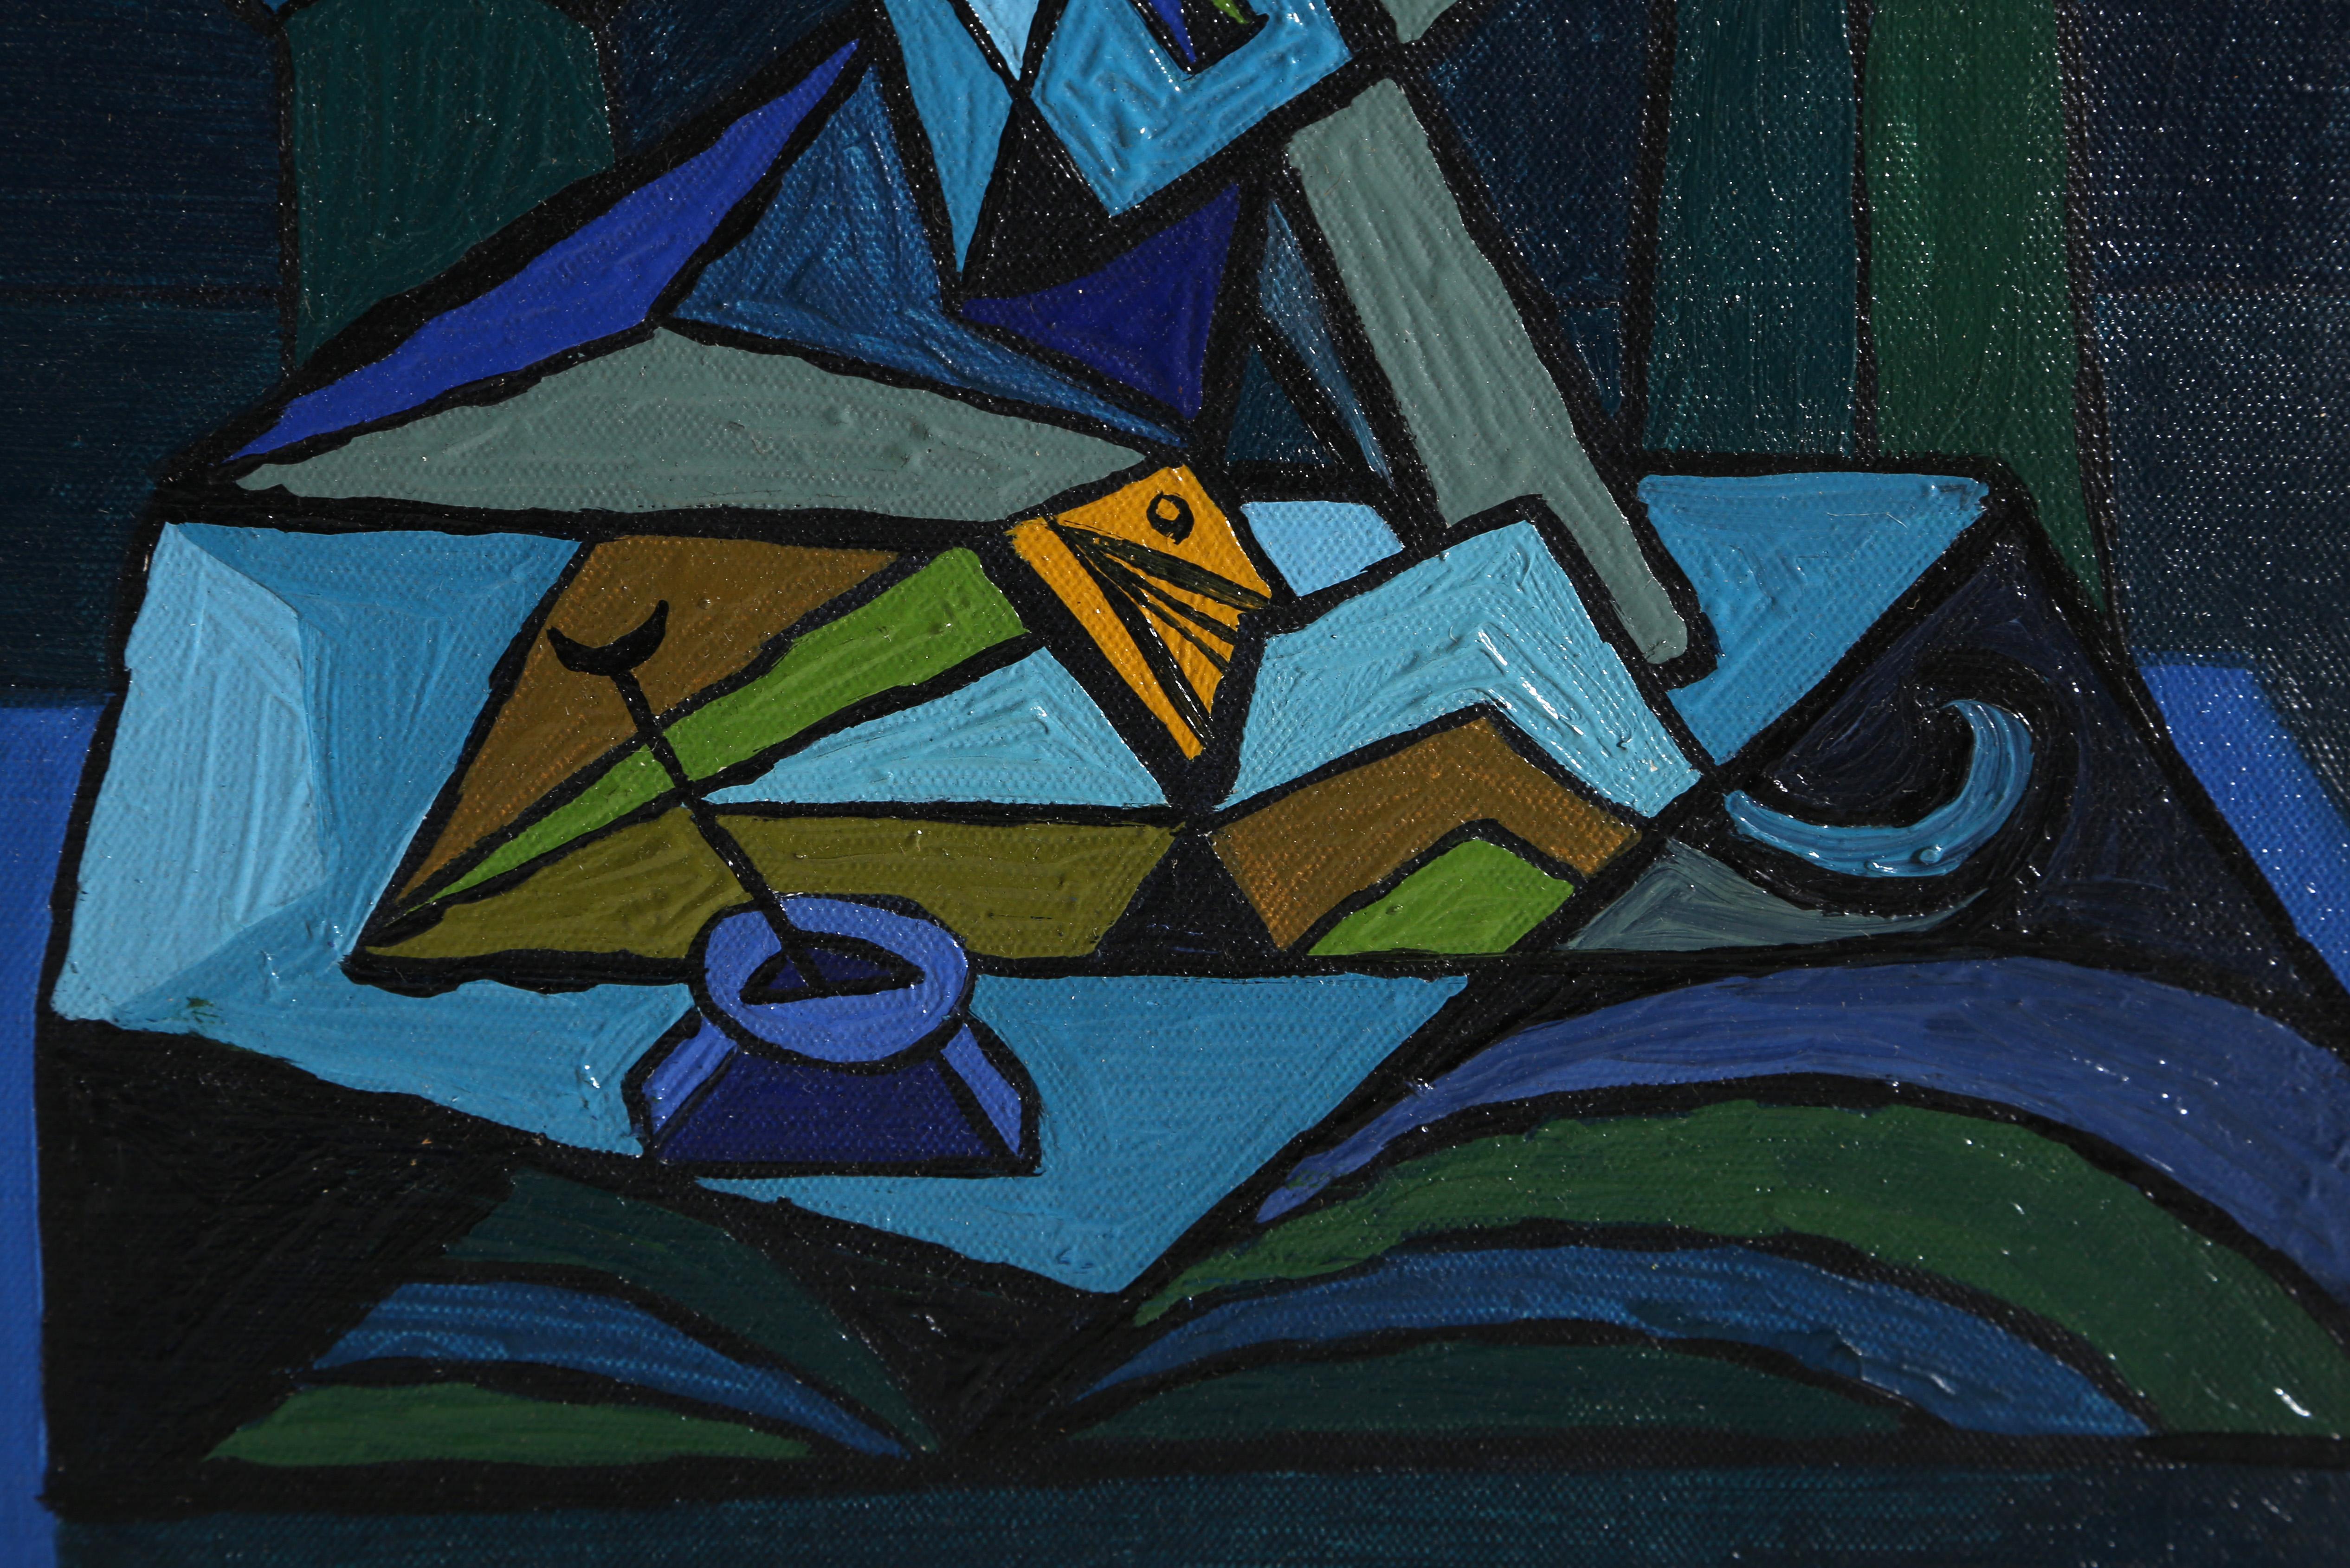 An original oil on canvas of a cubist still life by Benjamin Benno, American (1901 - 1980). By the early 1930s he had established a reputation as a member of the international avant-garde and exhibited with the most significant European artists